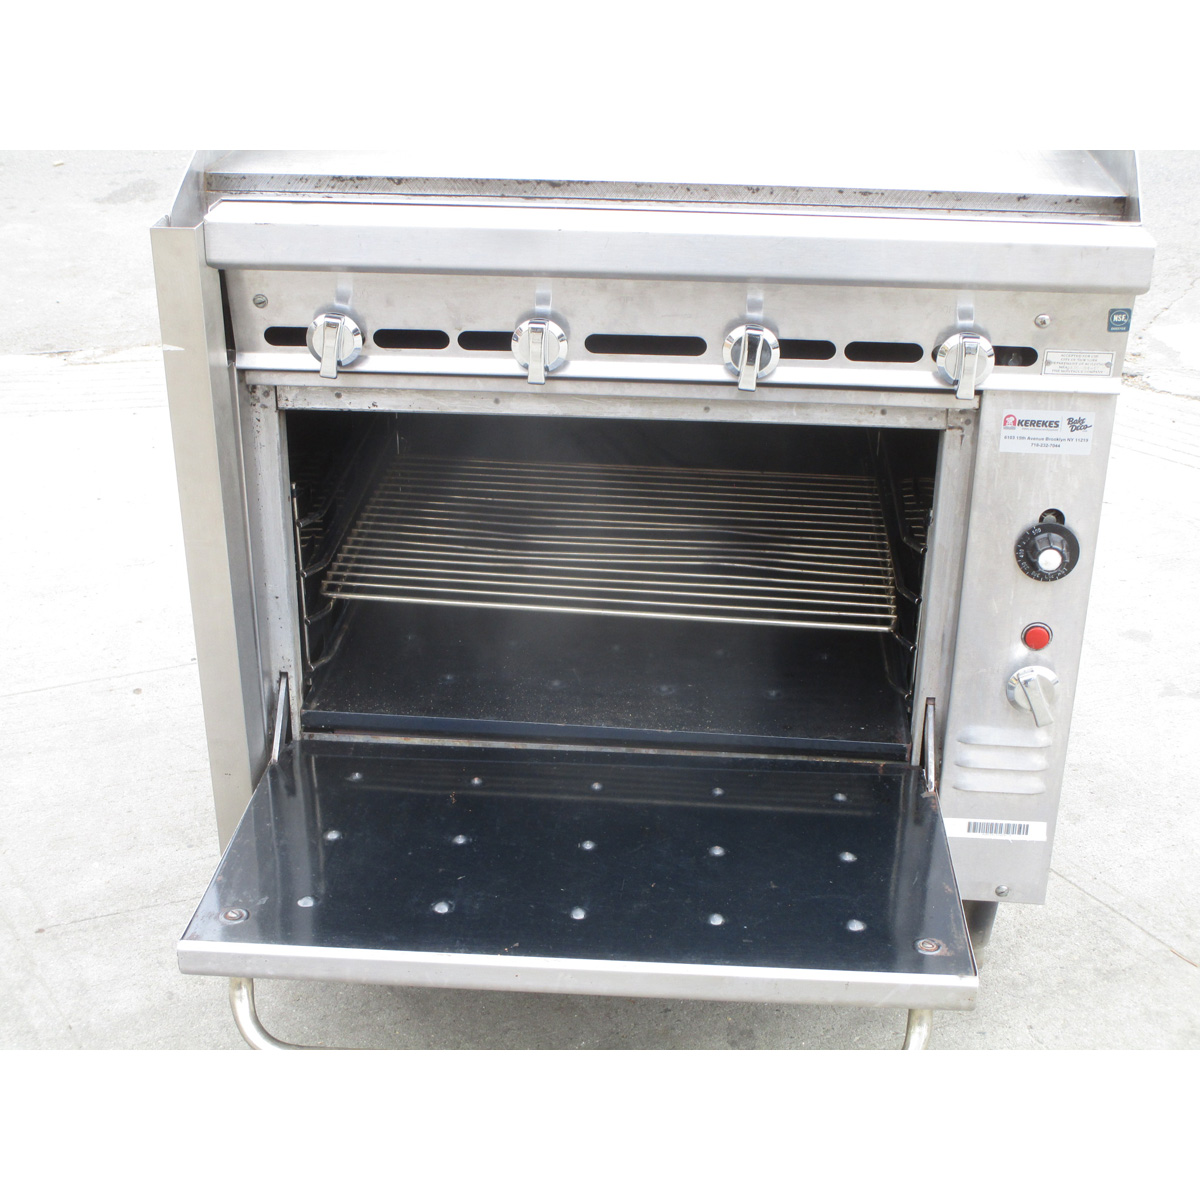 Montague 136-8 Legend 36" Griddle With Oven, Used Very Good Condition image 2